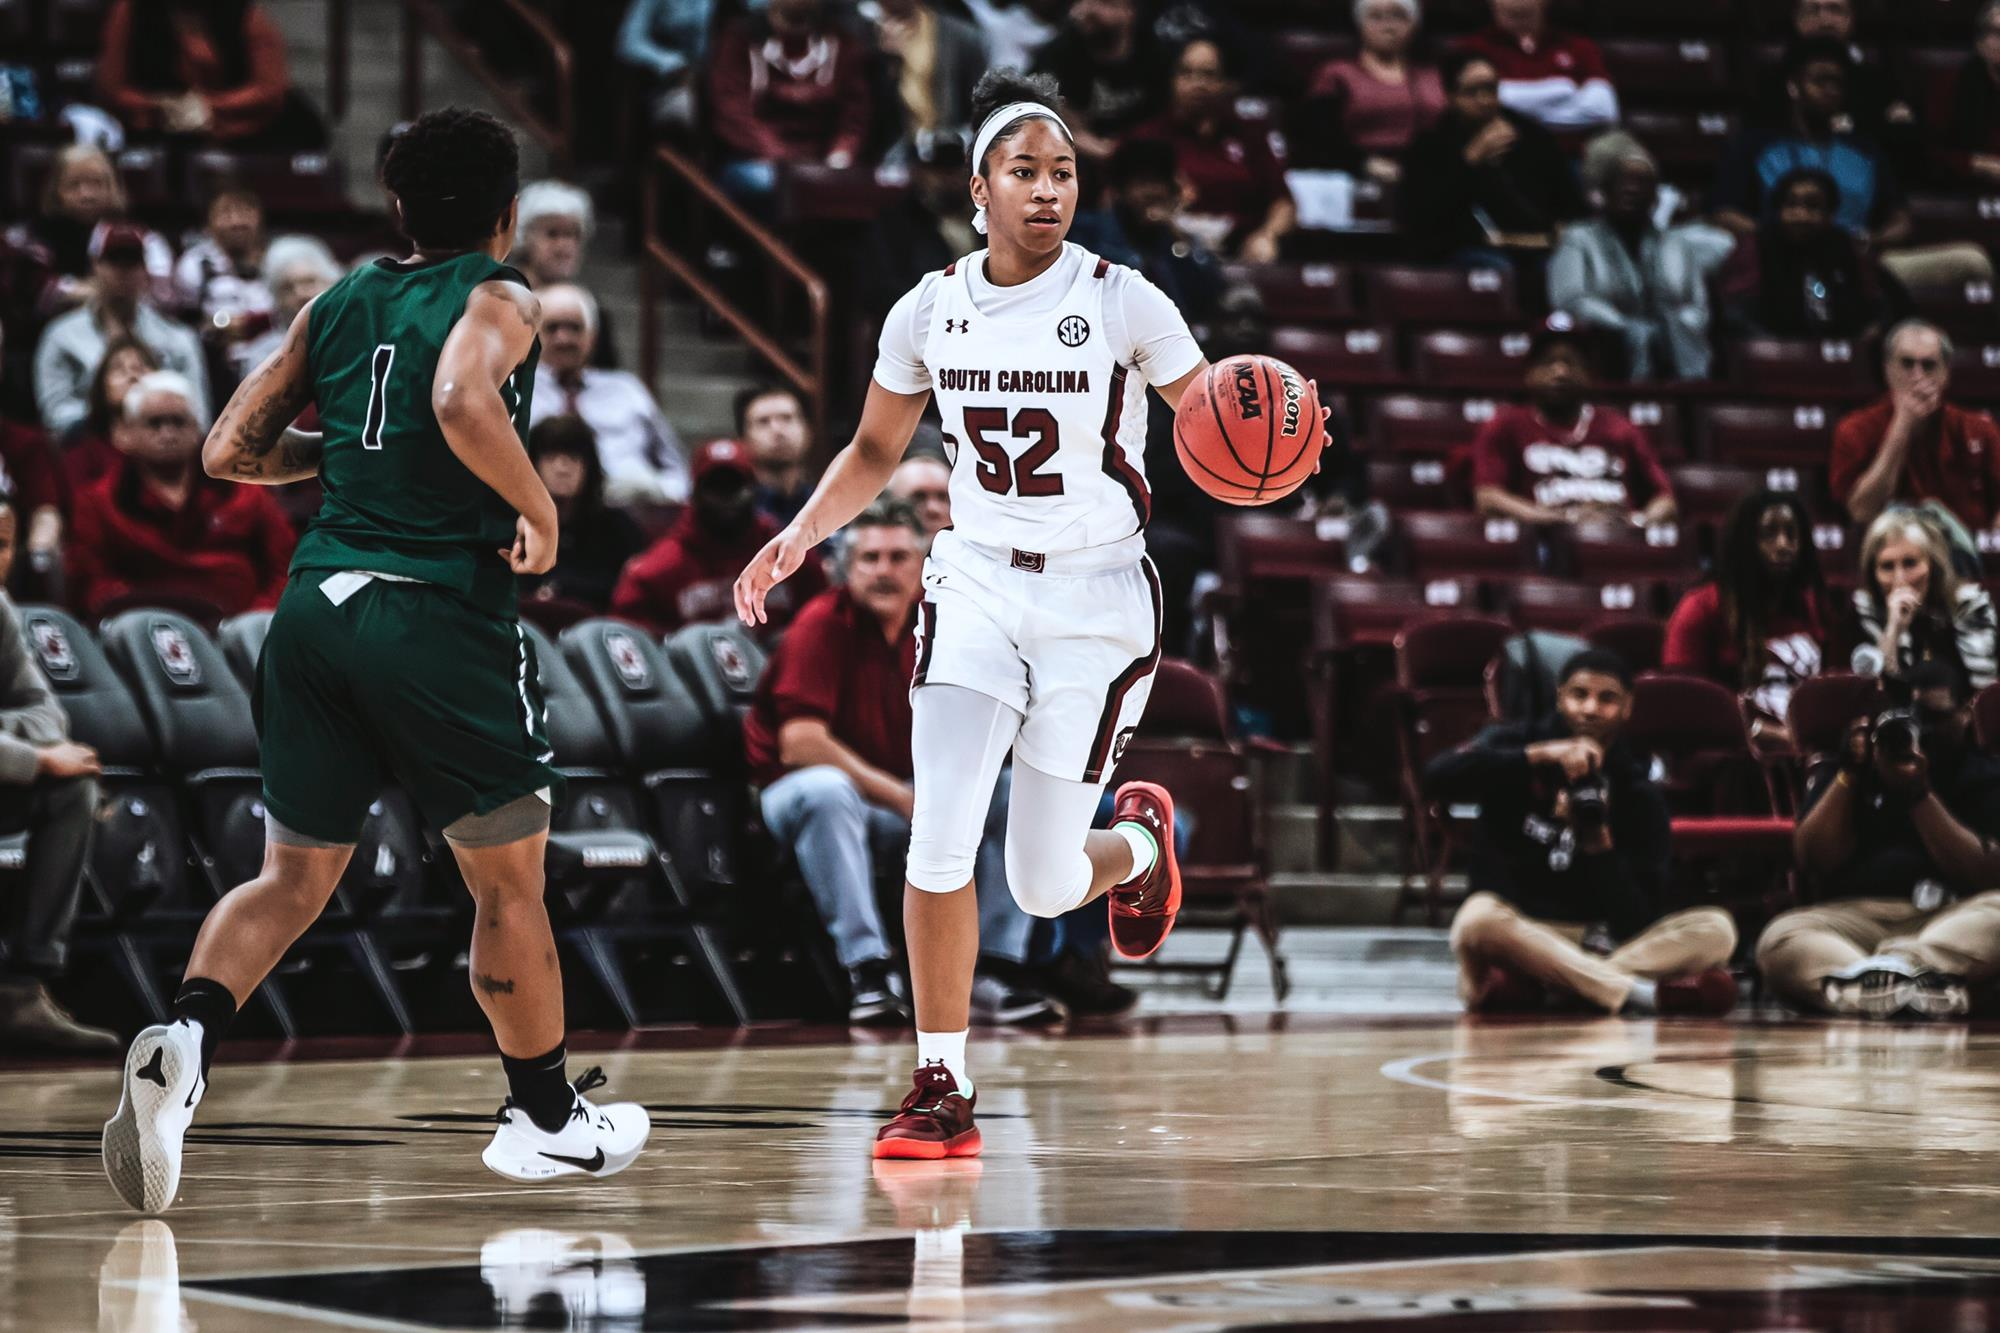 Harris Joins 1,000 Point Club as Gamecocks Roll